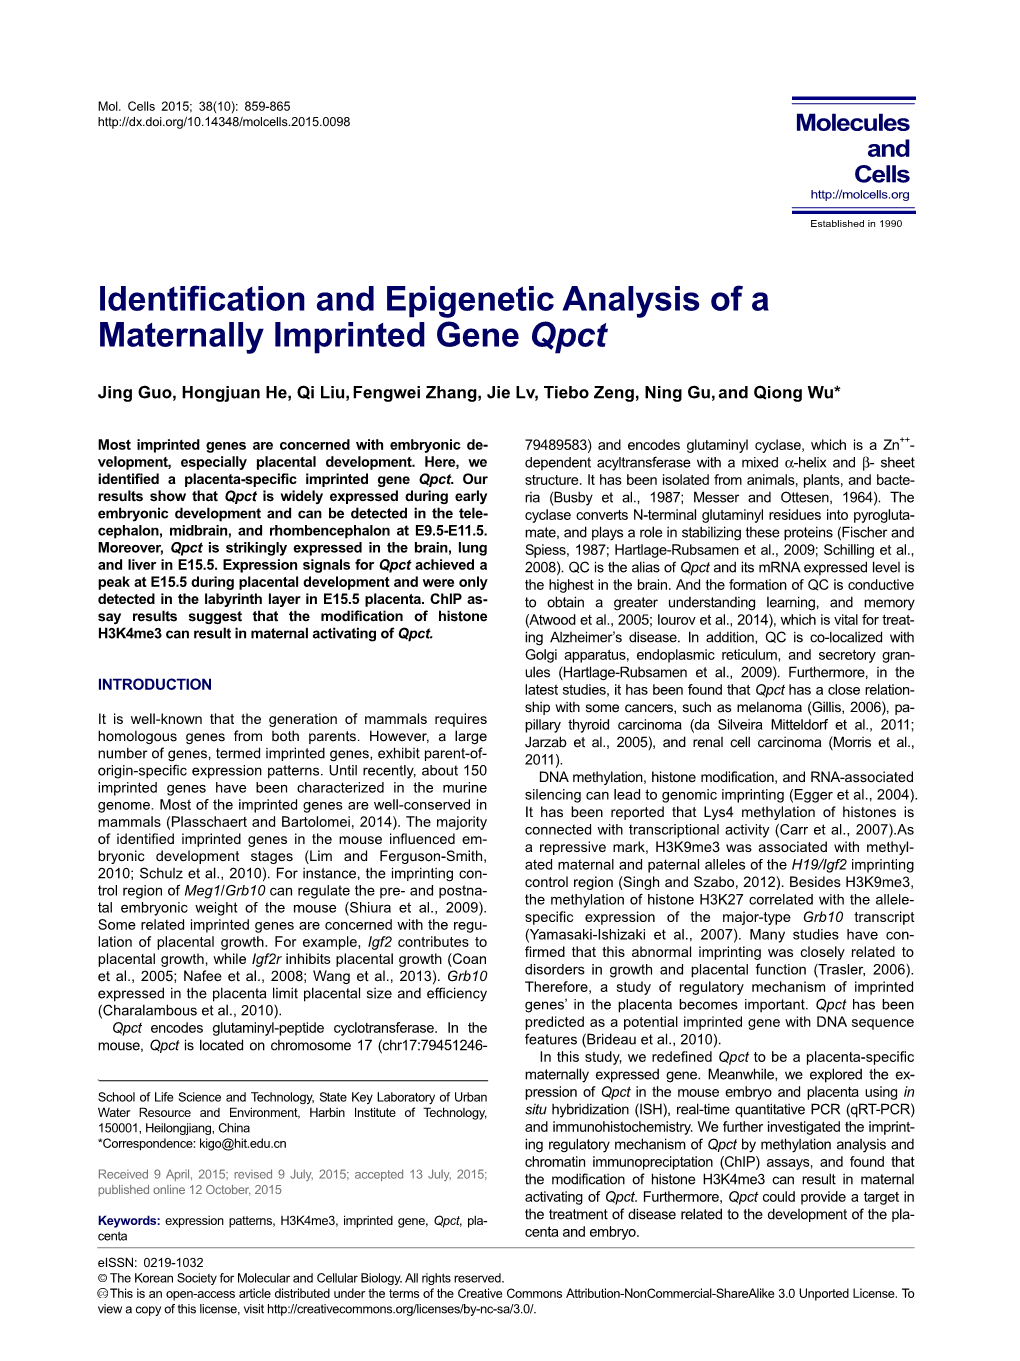 Identification and Epigenetic Analysis of a Maternally Imprinted Gene Qpct